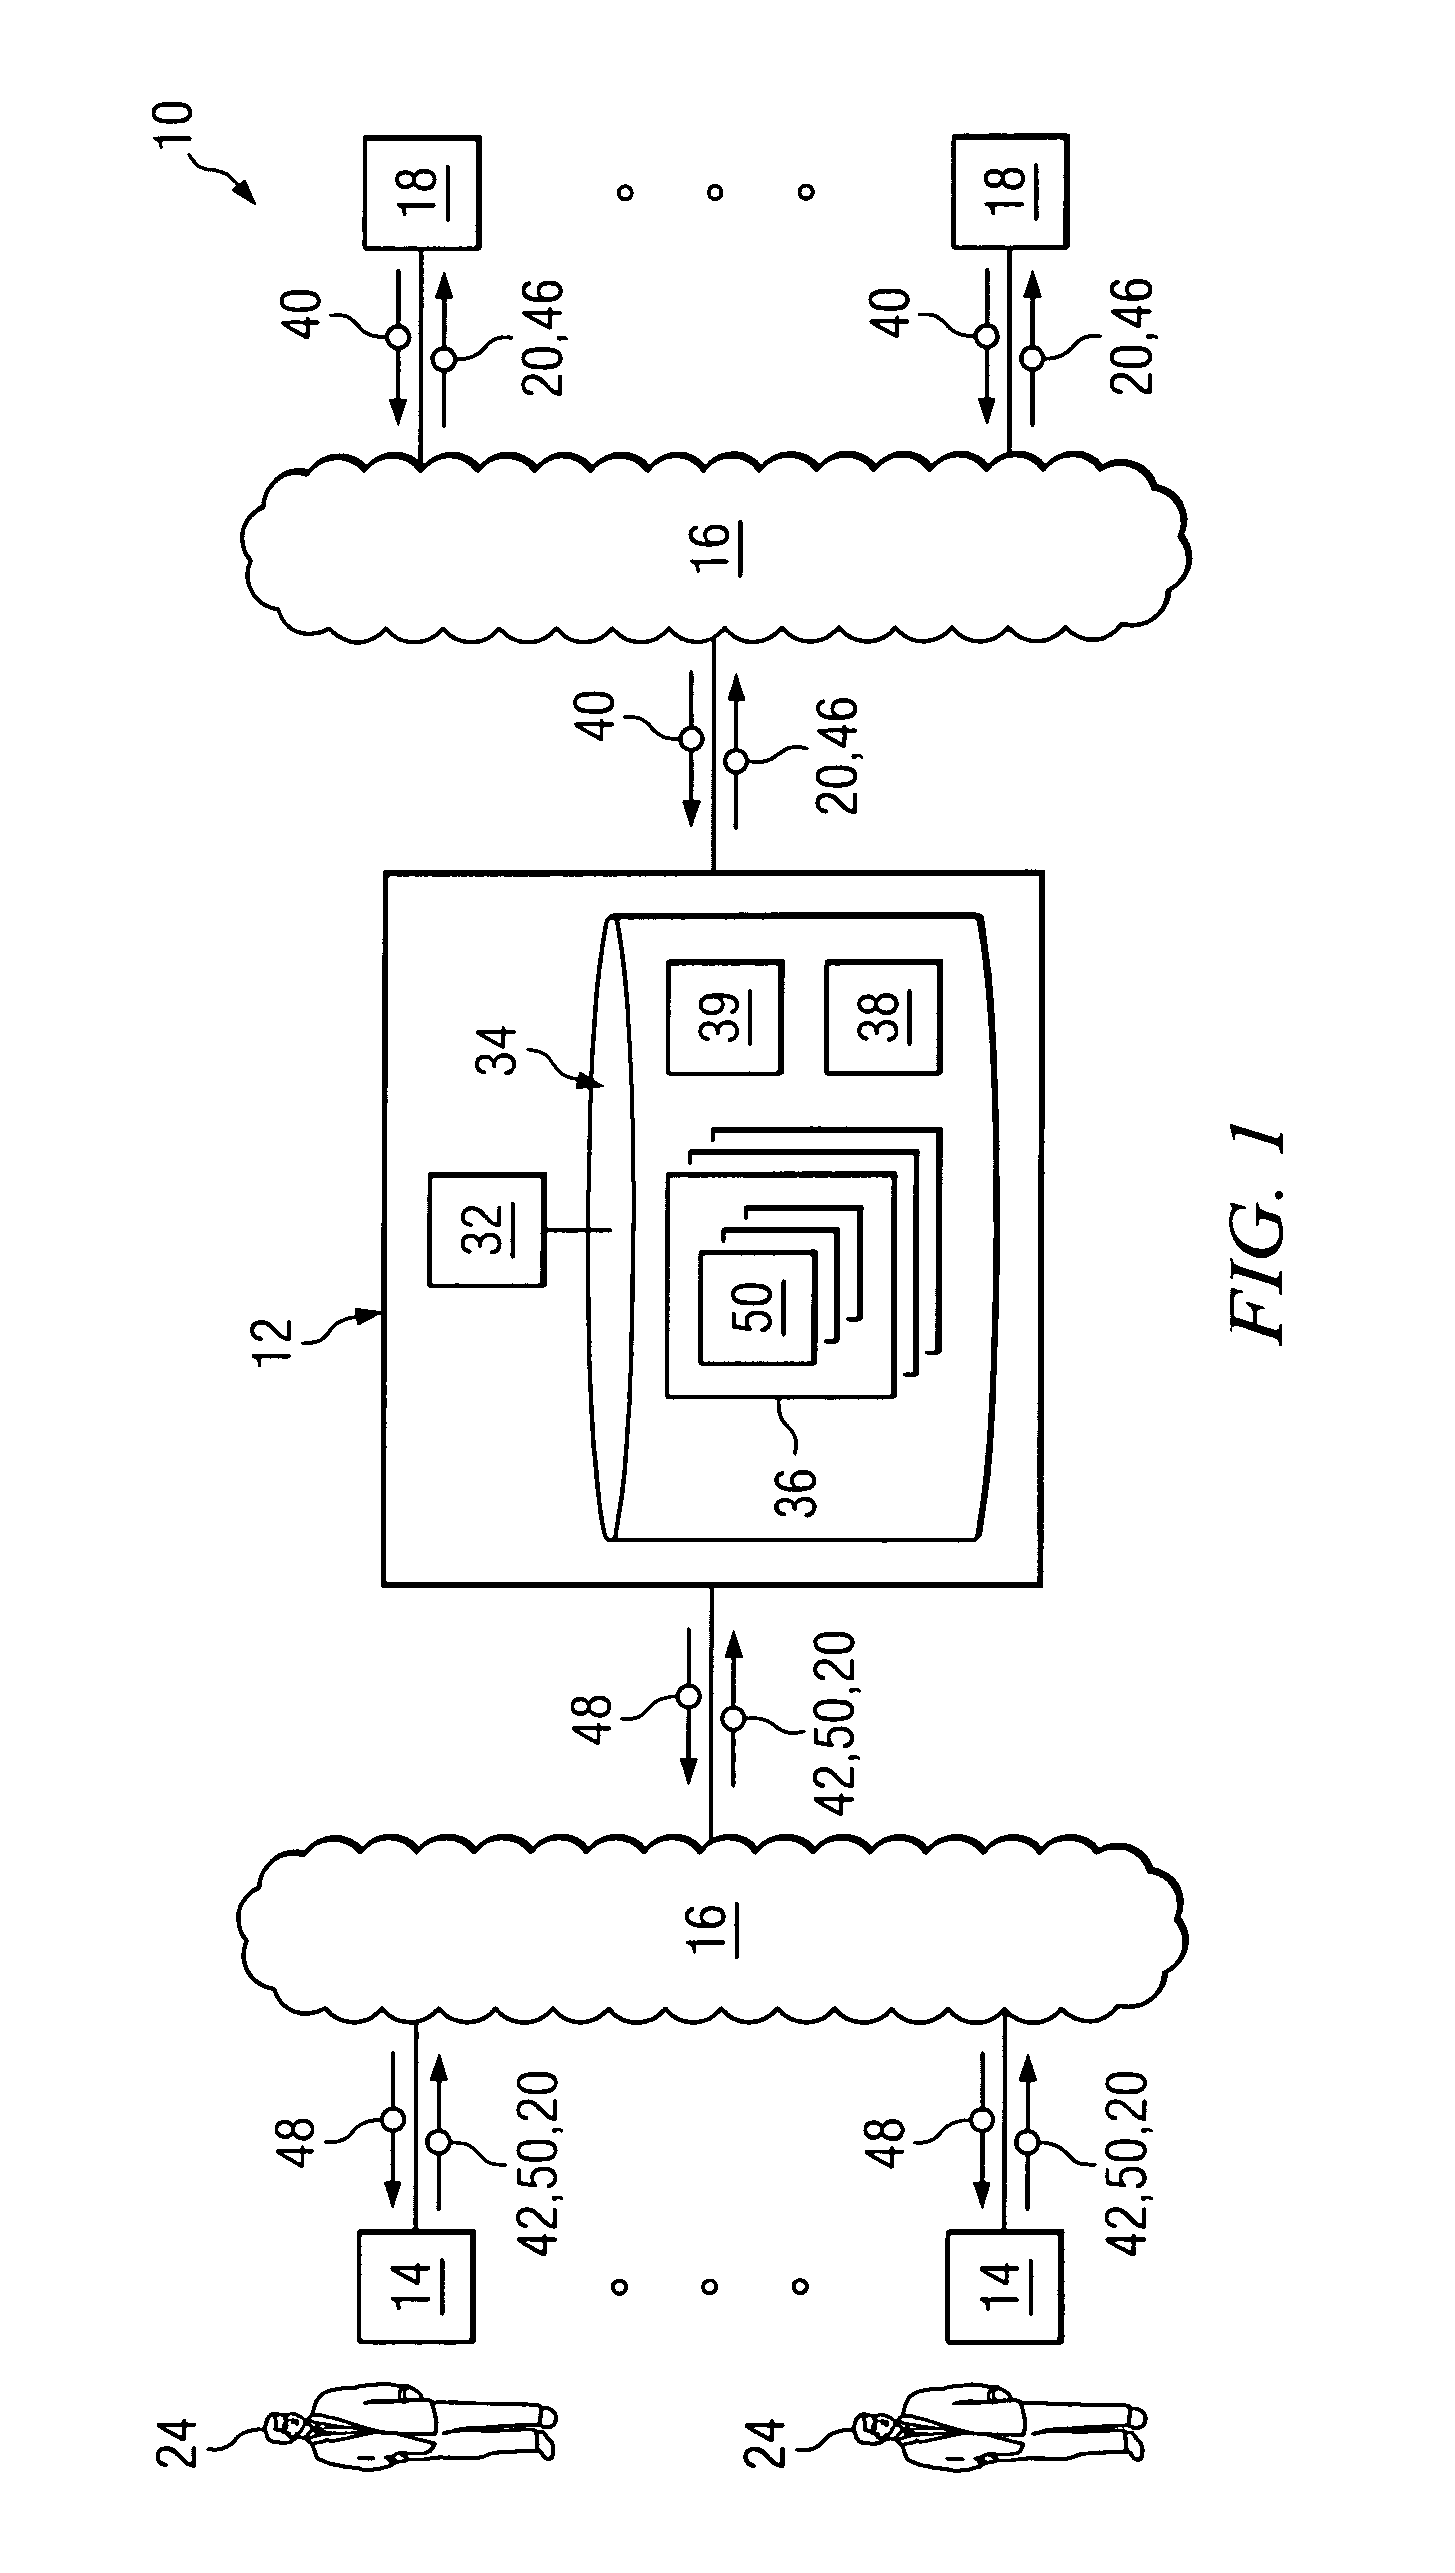 Methods and apparatus for composite trading order processing